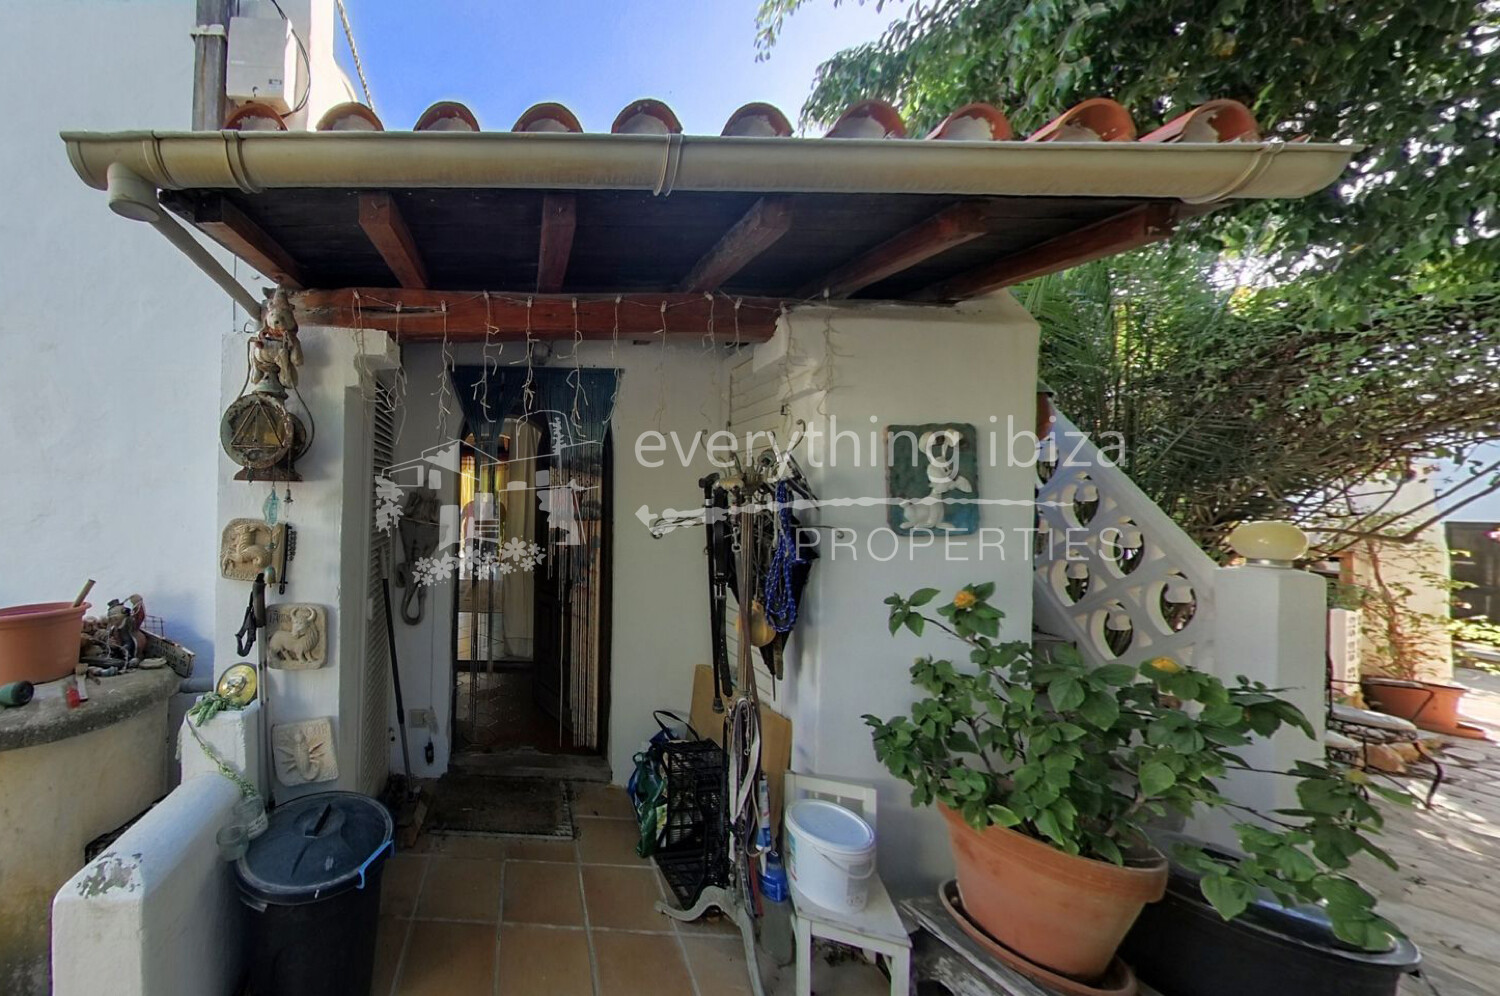 Homely Detached House in Sought After Cala Vadella, ref. 1621, for sale in Ibiza by everything ibiza Properties